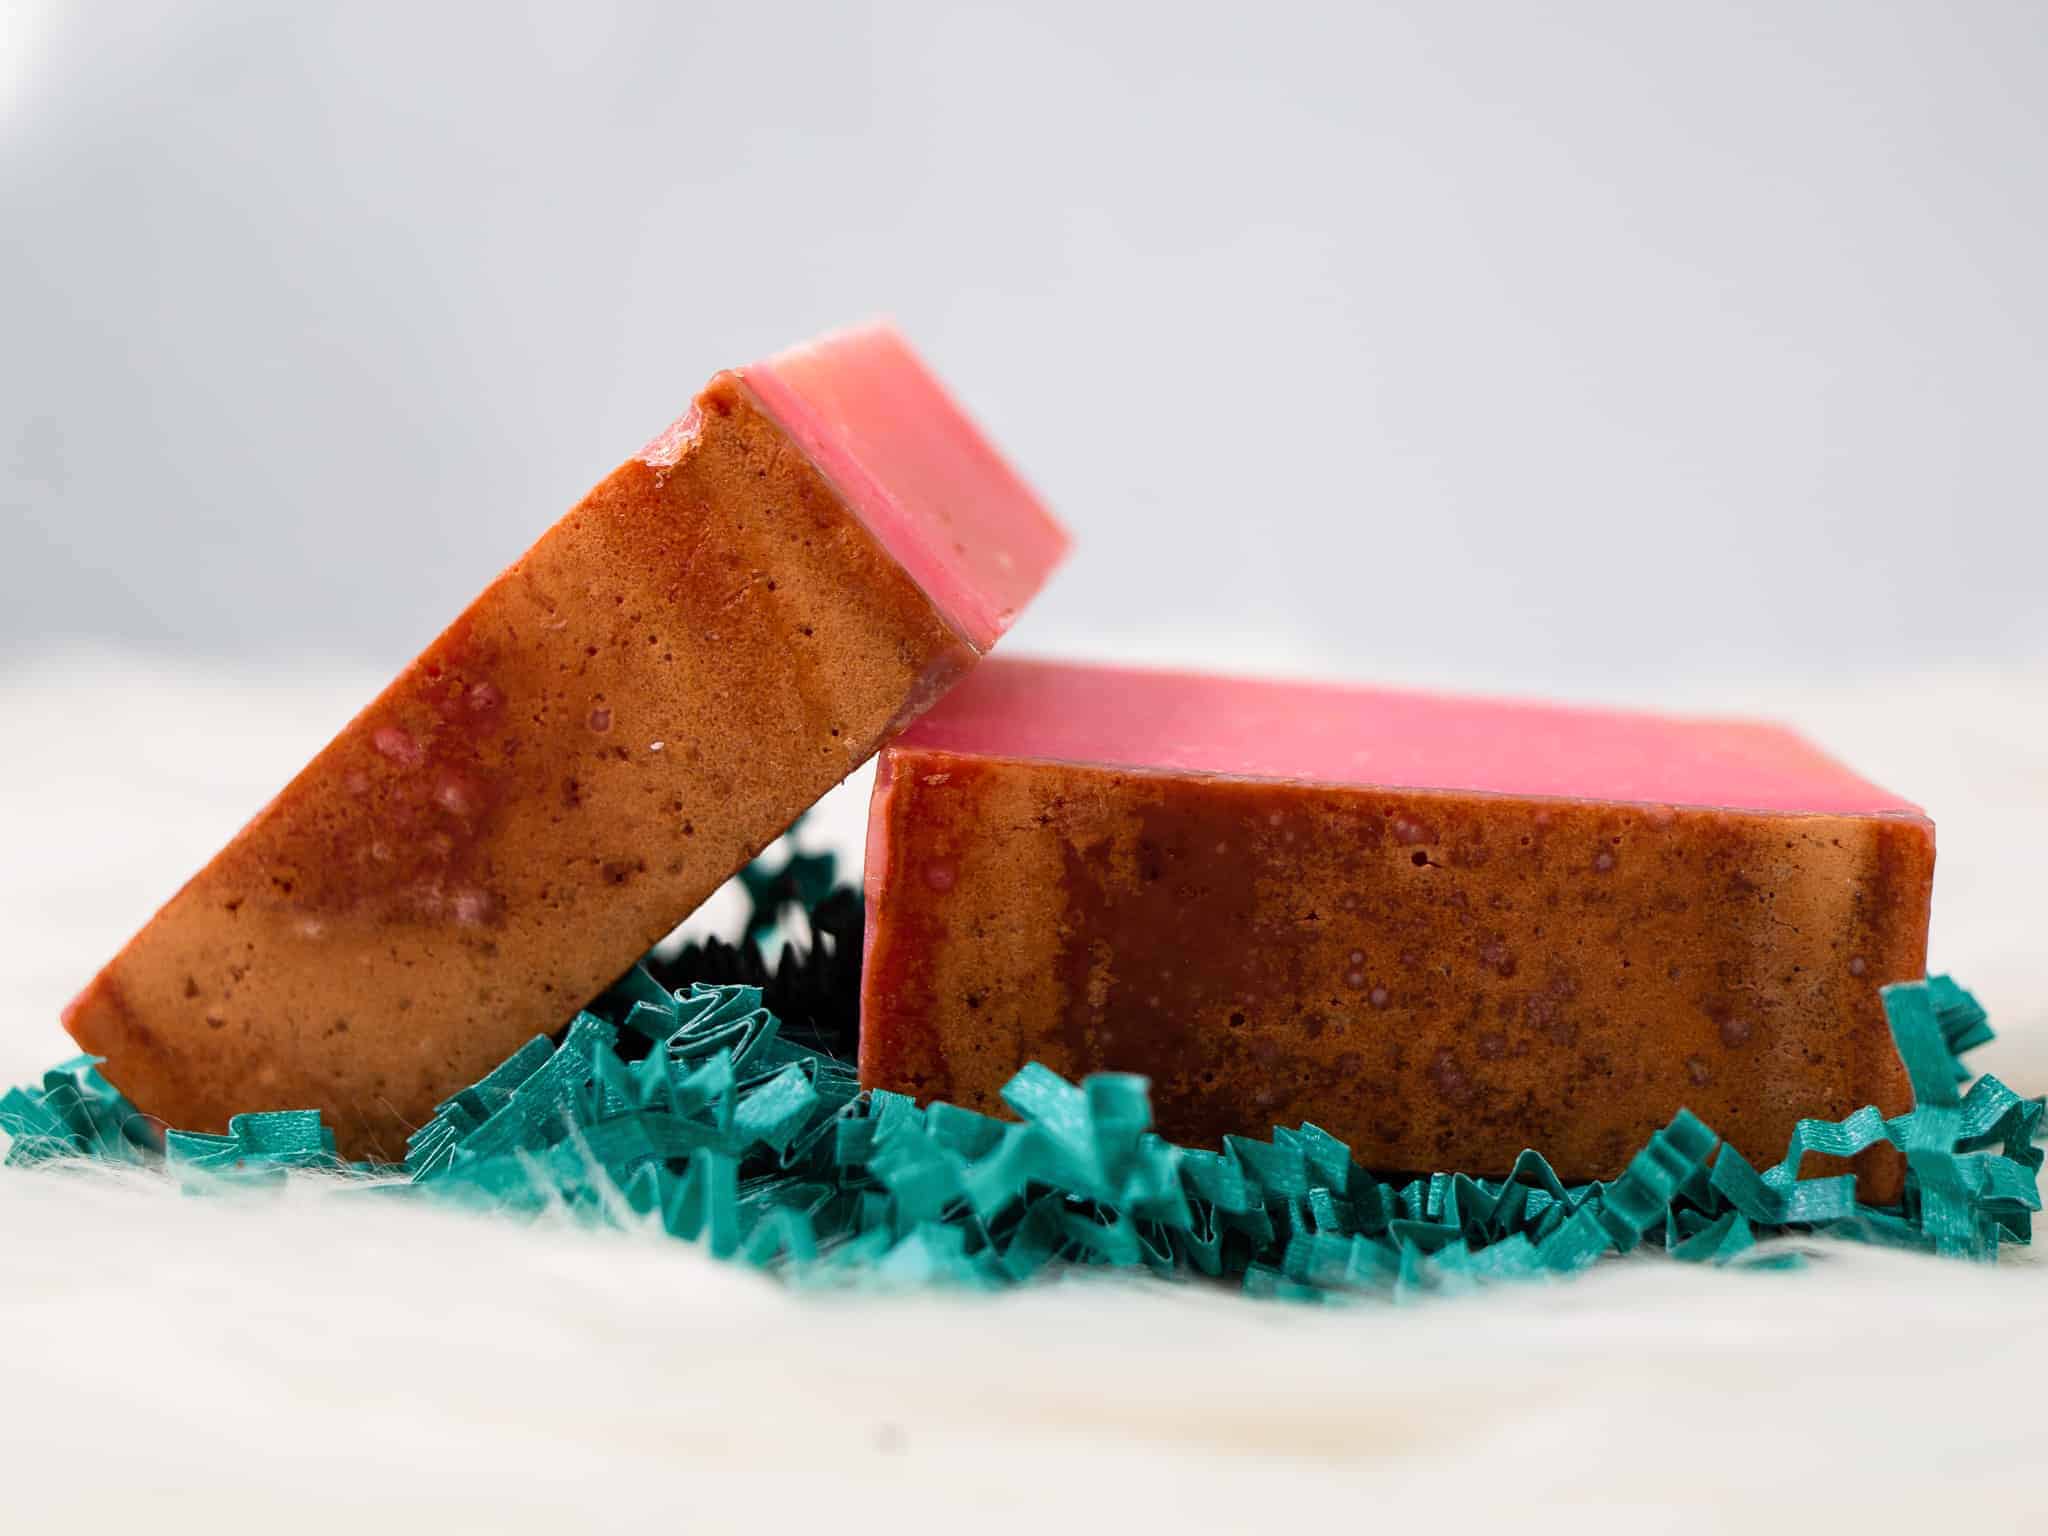 This Cherry Almond Vegan Soap is made with love by Sudzy Bums! Shop more unique gift ideas today with Spots Initiatives, the best way to support creators.